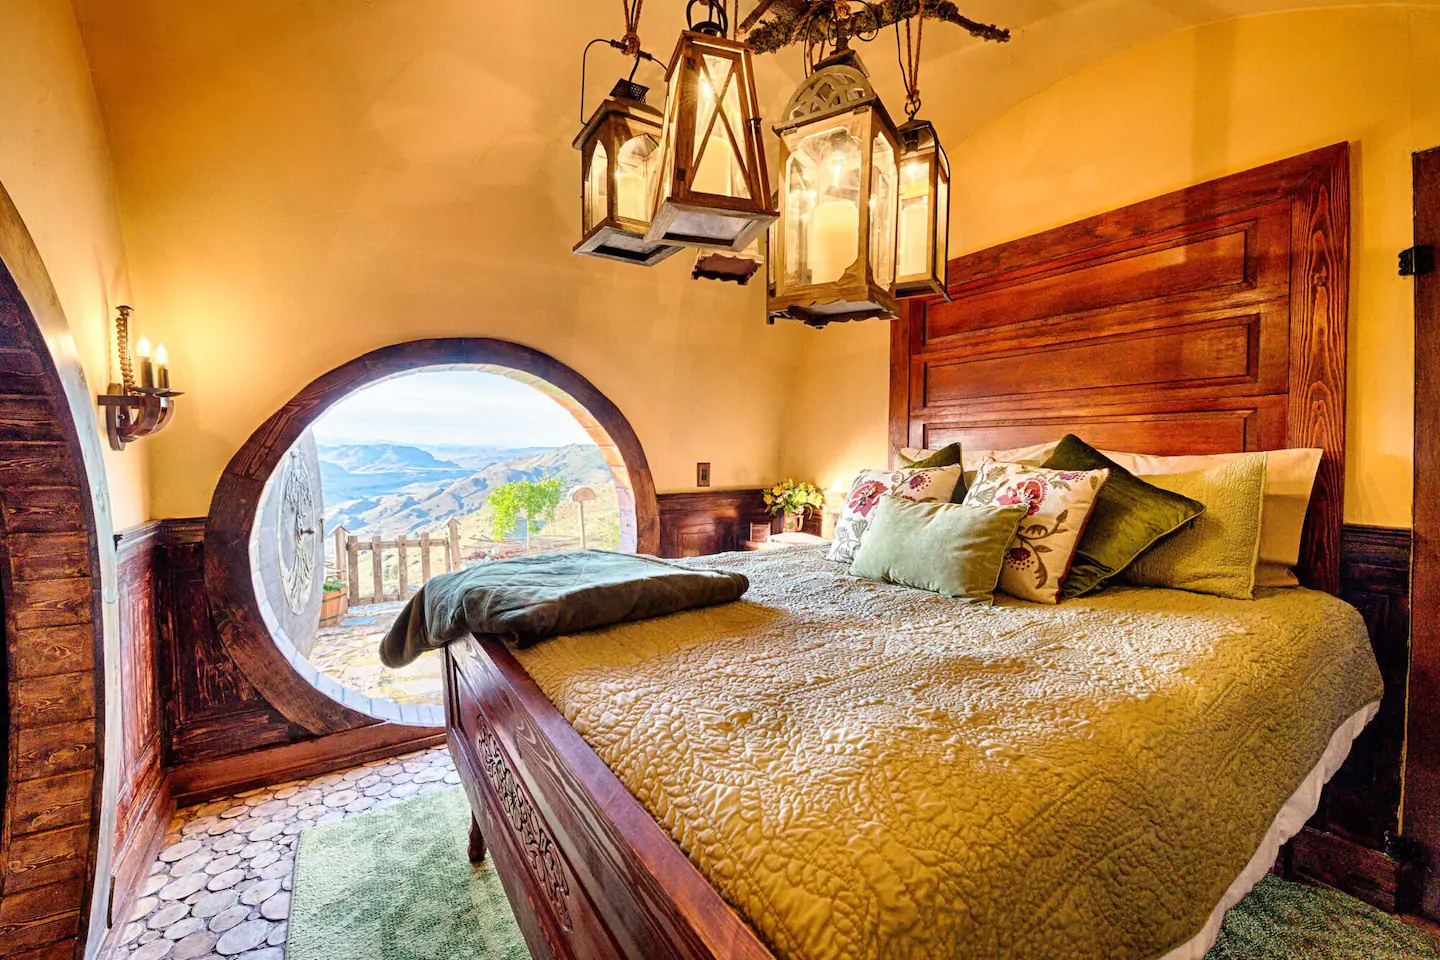 A bed with yellow bedding is made with green throw pillows. A circle door leads outside.